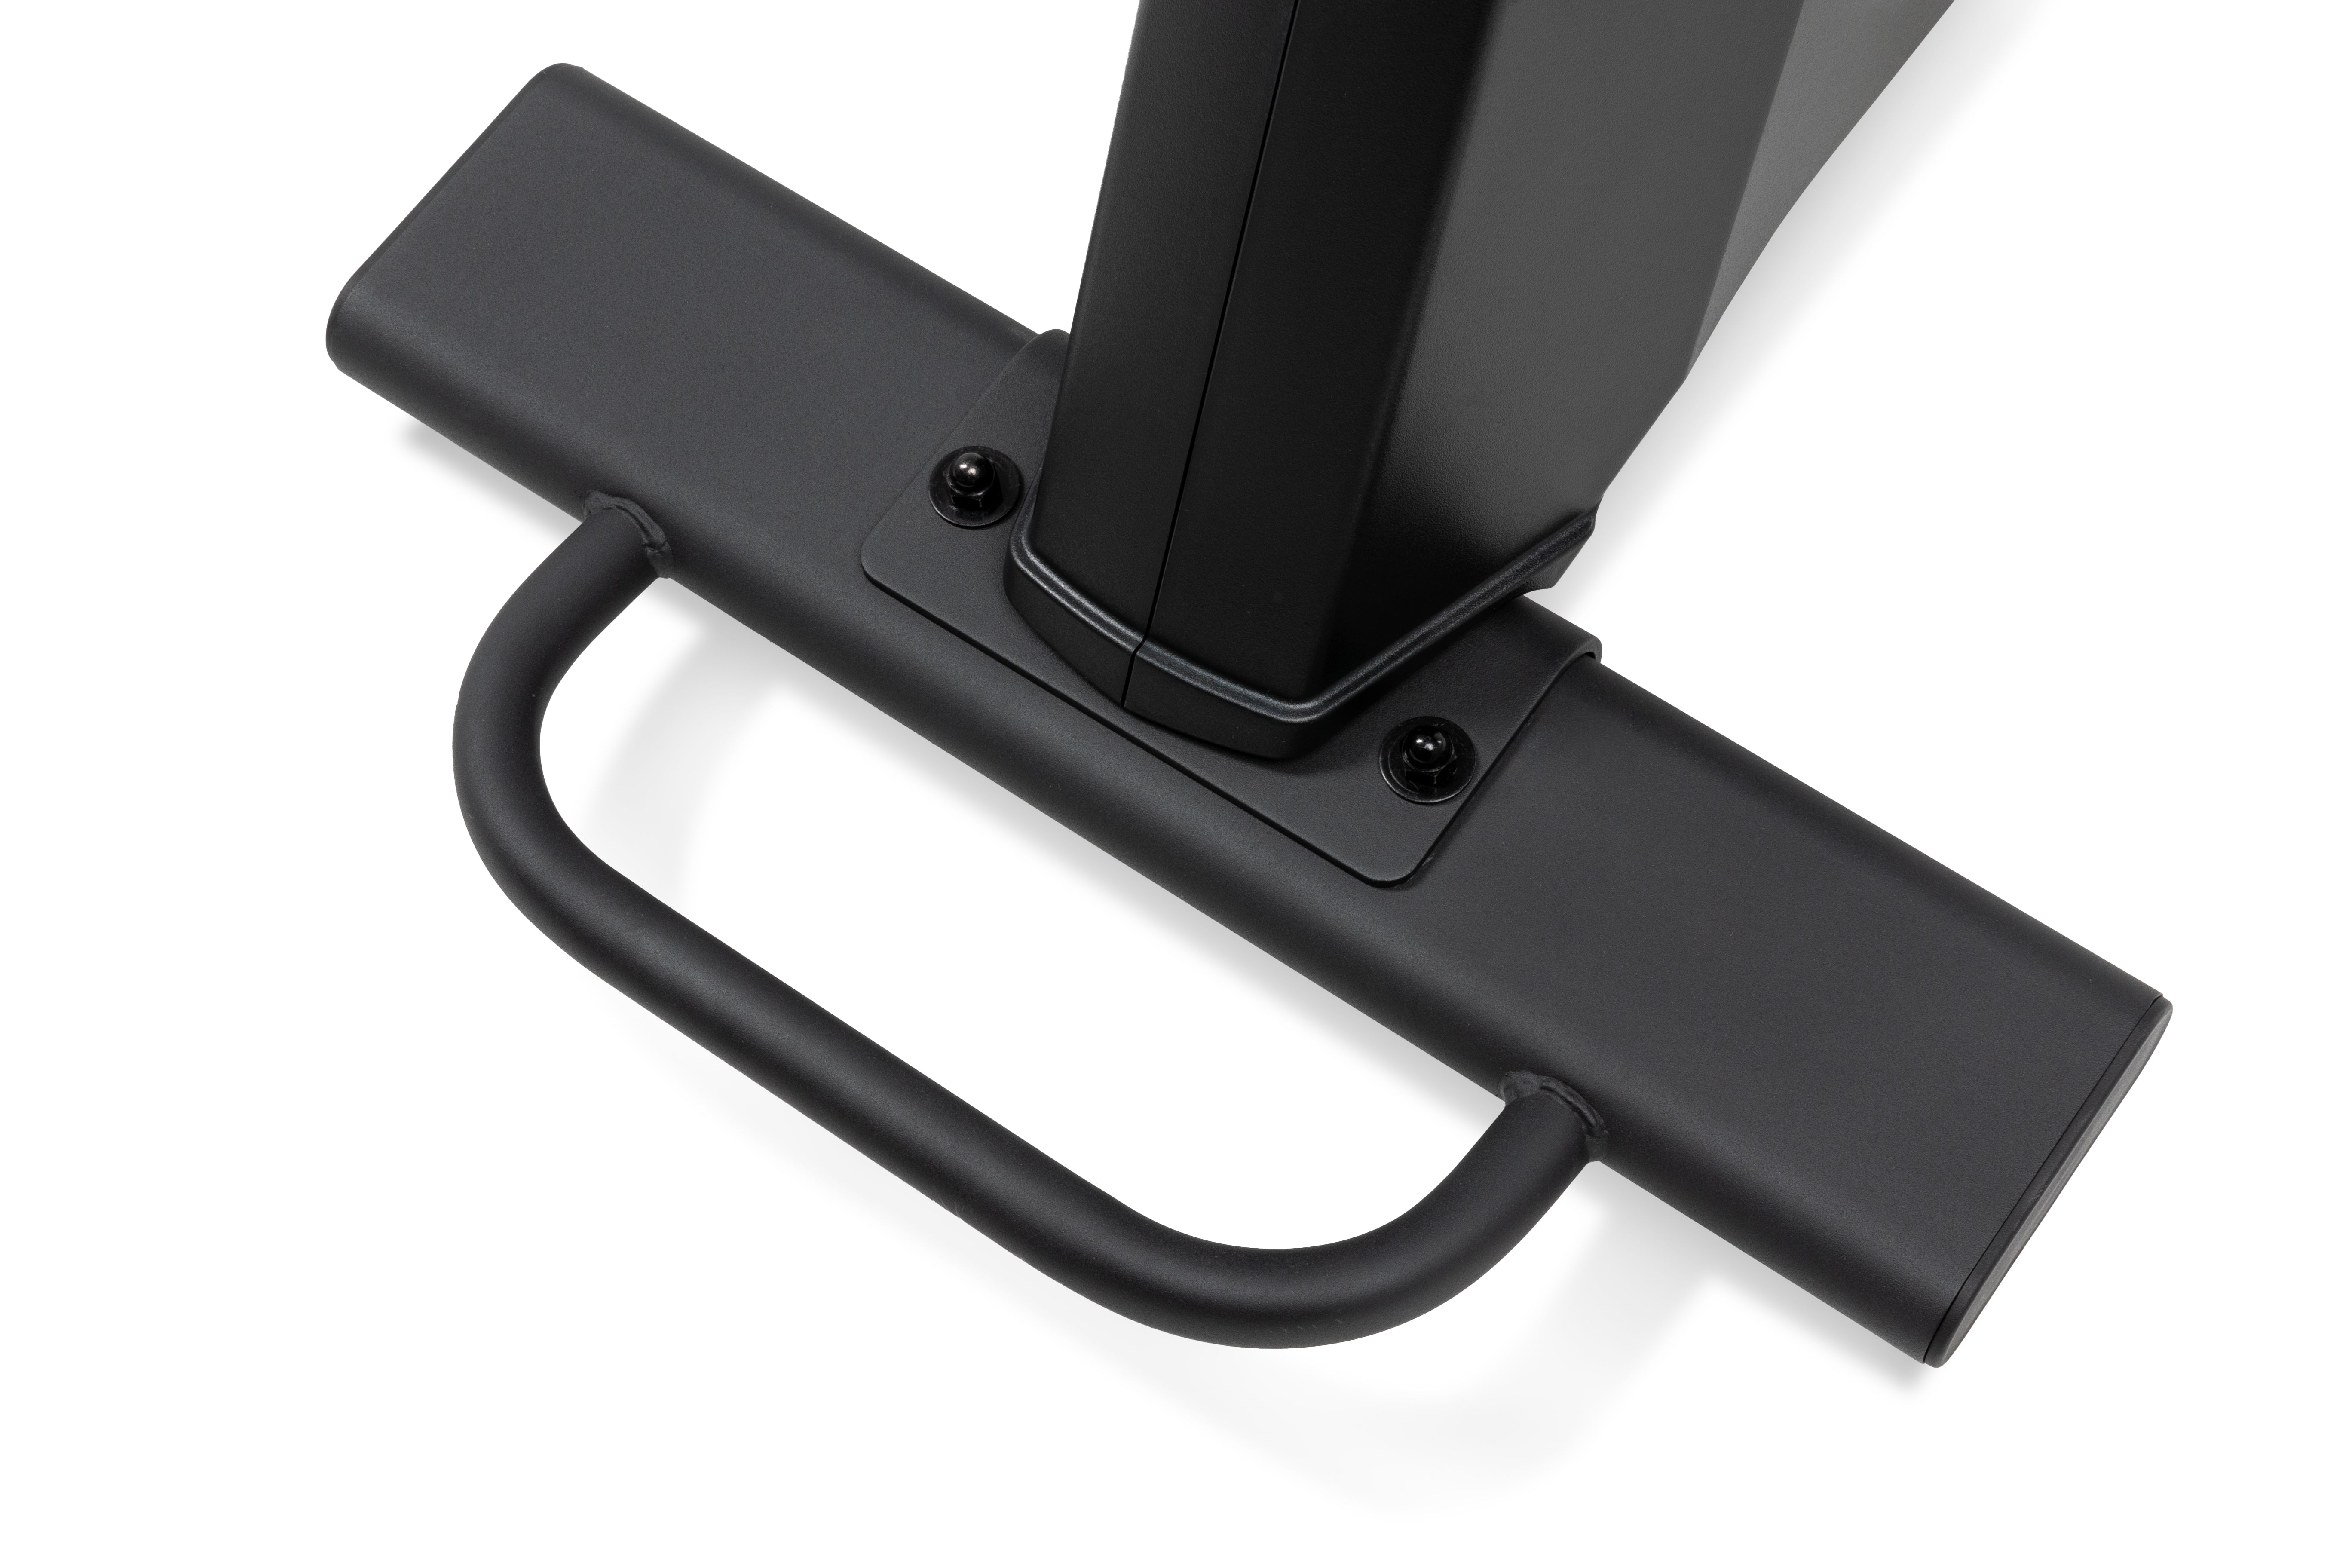 Close-up of the Sole B94 exercise machine's matte black base, featuring a sturdy handlebar and a joint connecting to the main pillar with visible screws.